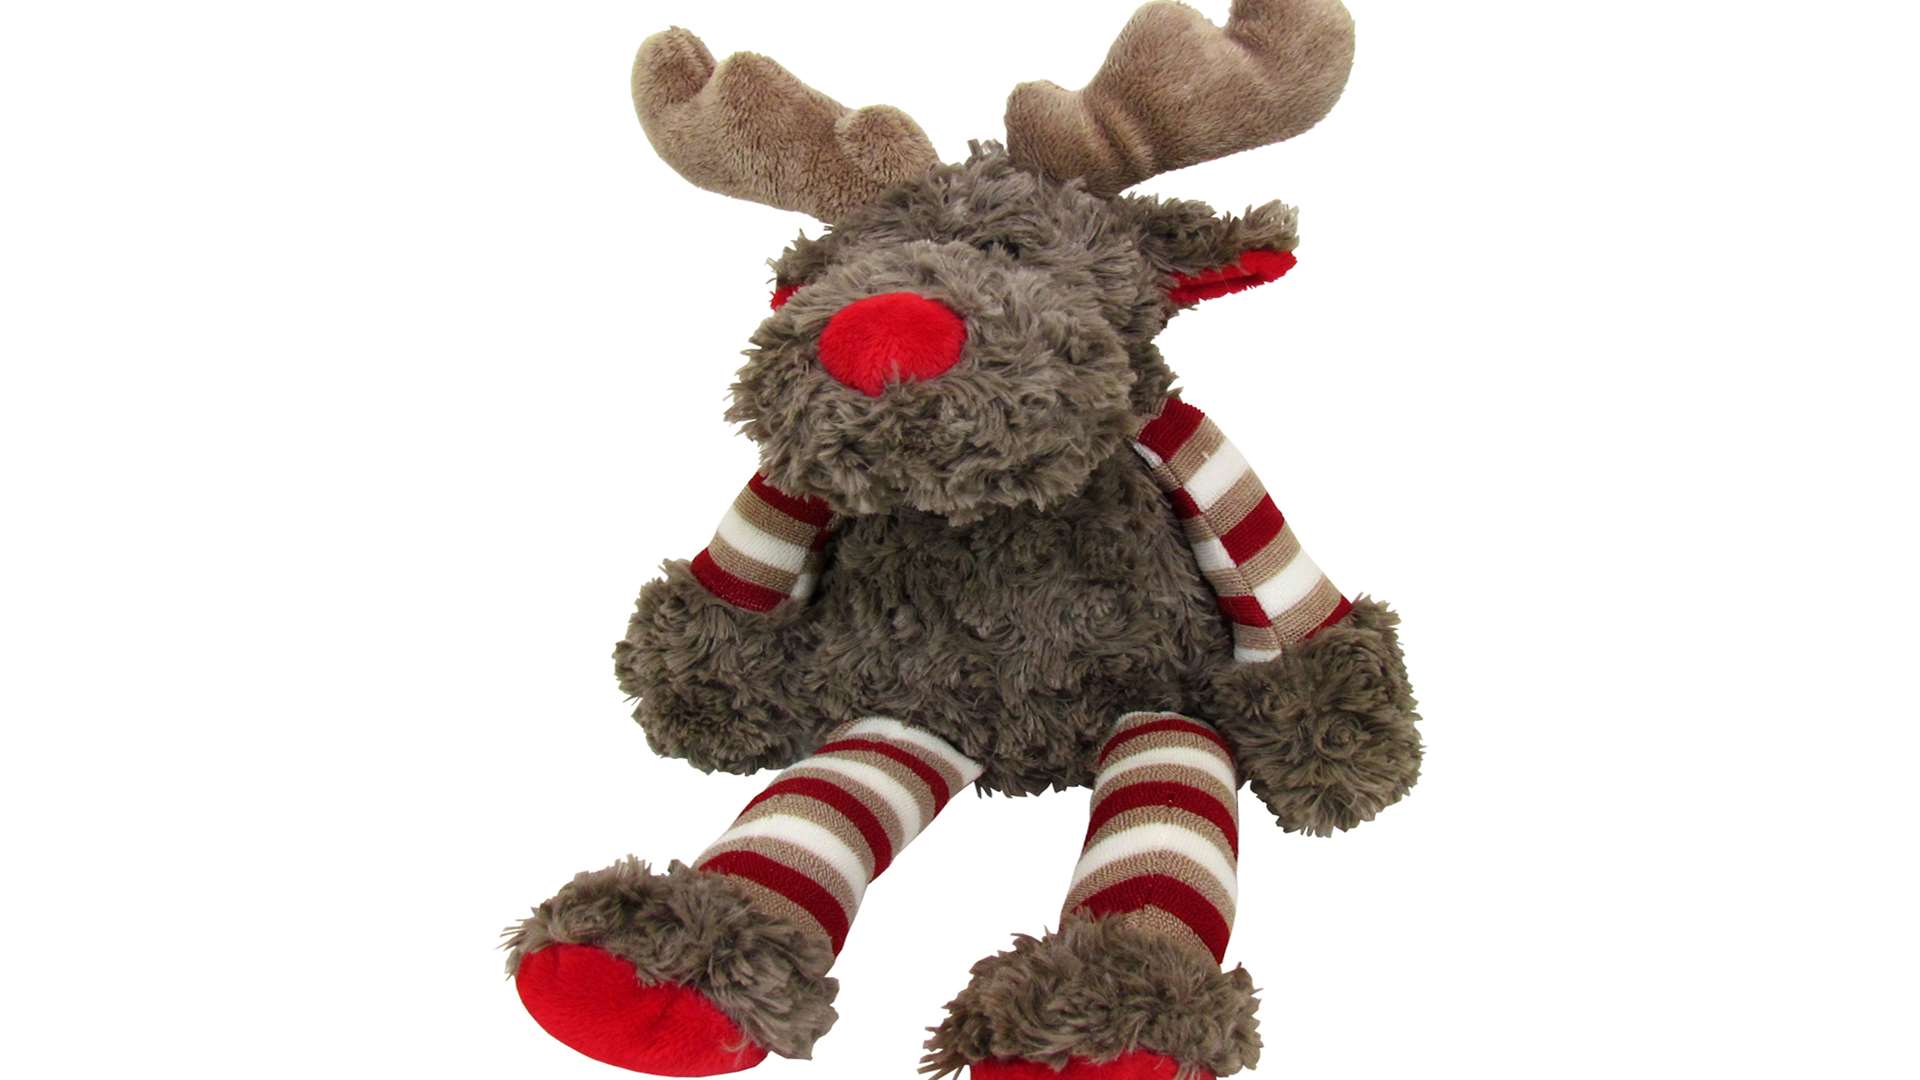 Enjoy some reindeer games with the cuddles time reindeer, £3.99, Lloyds Pharmacy